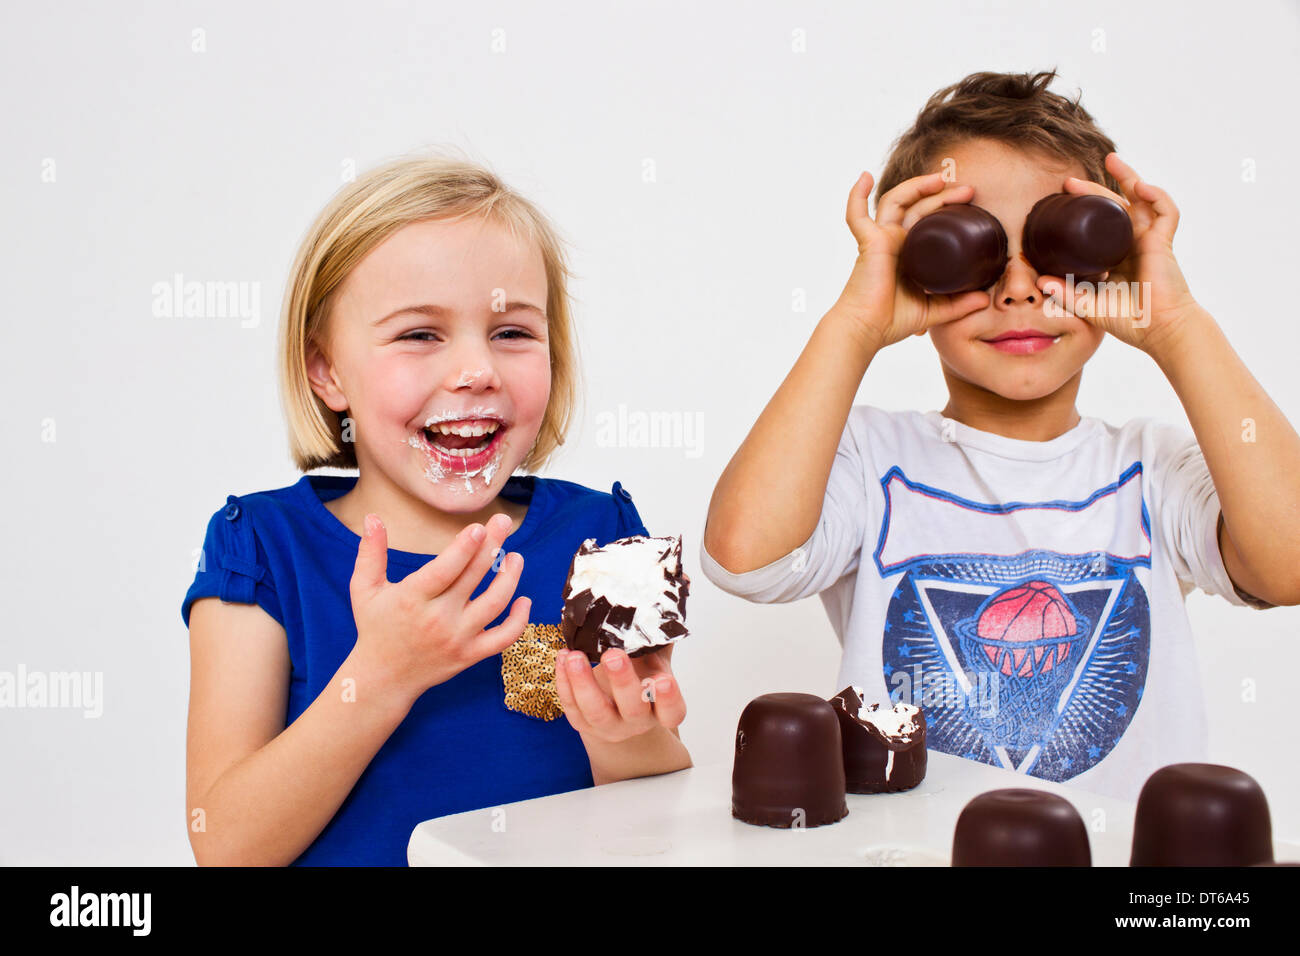 Studio shot of brother and sister with chocolate marshmallows Stock Photo